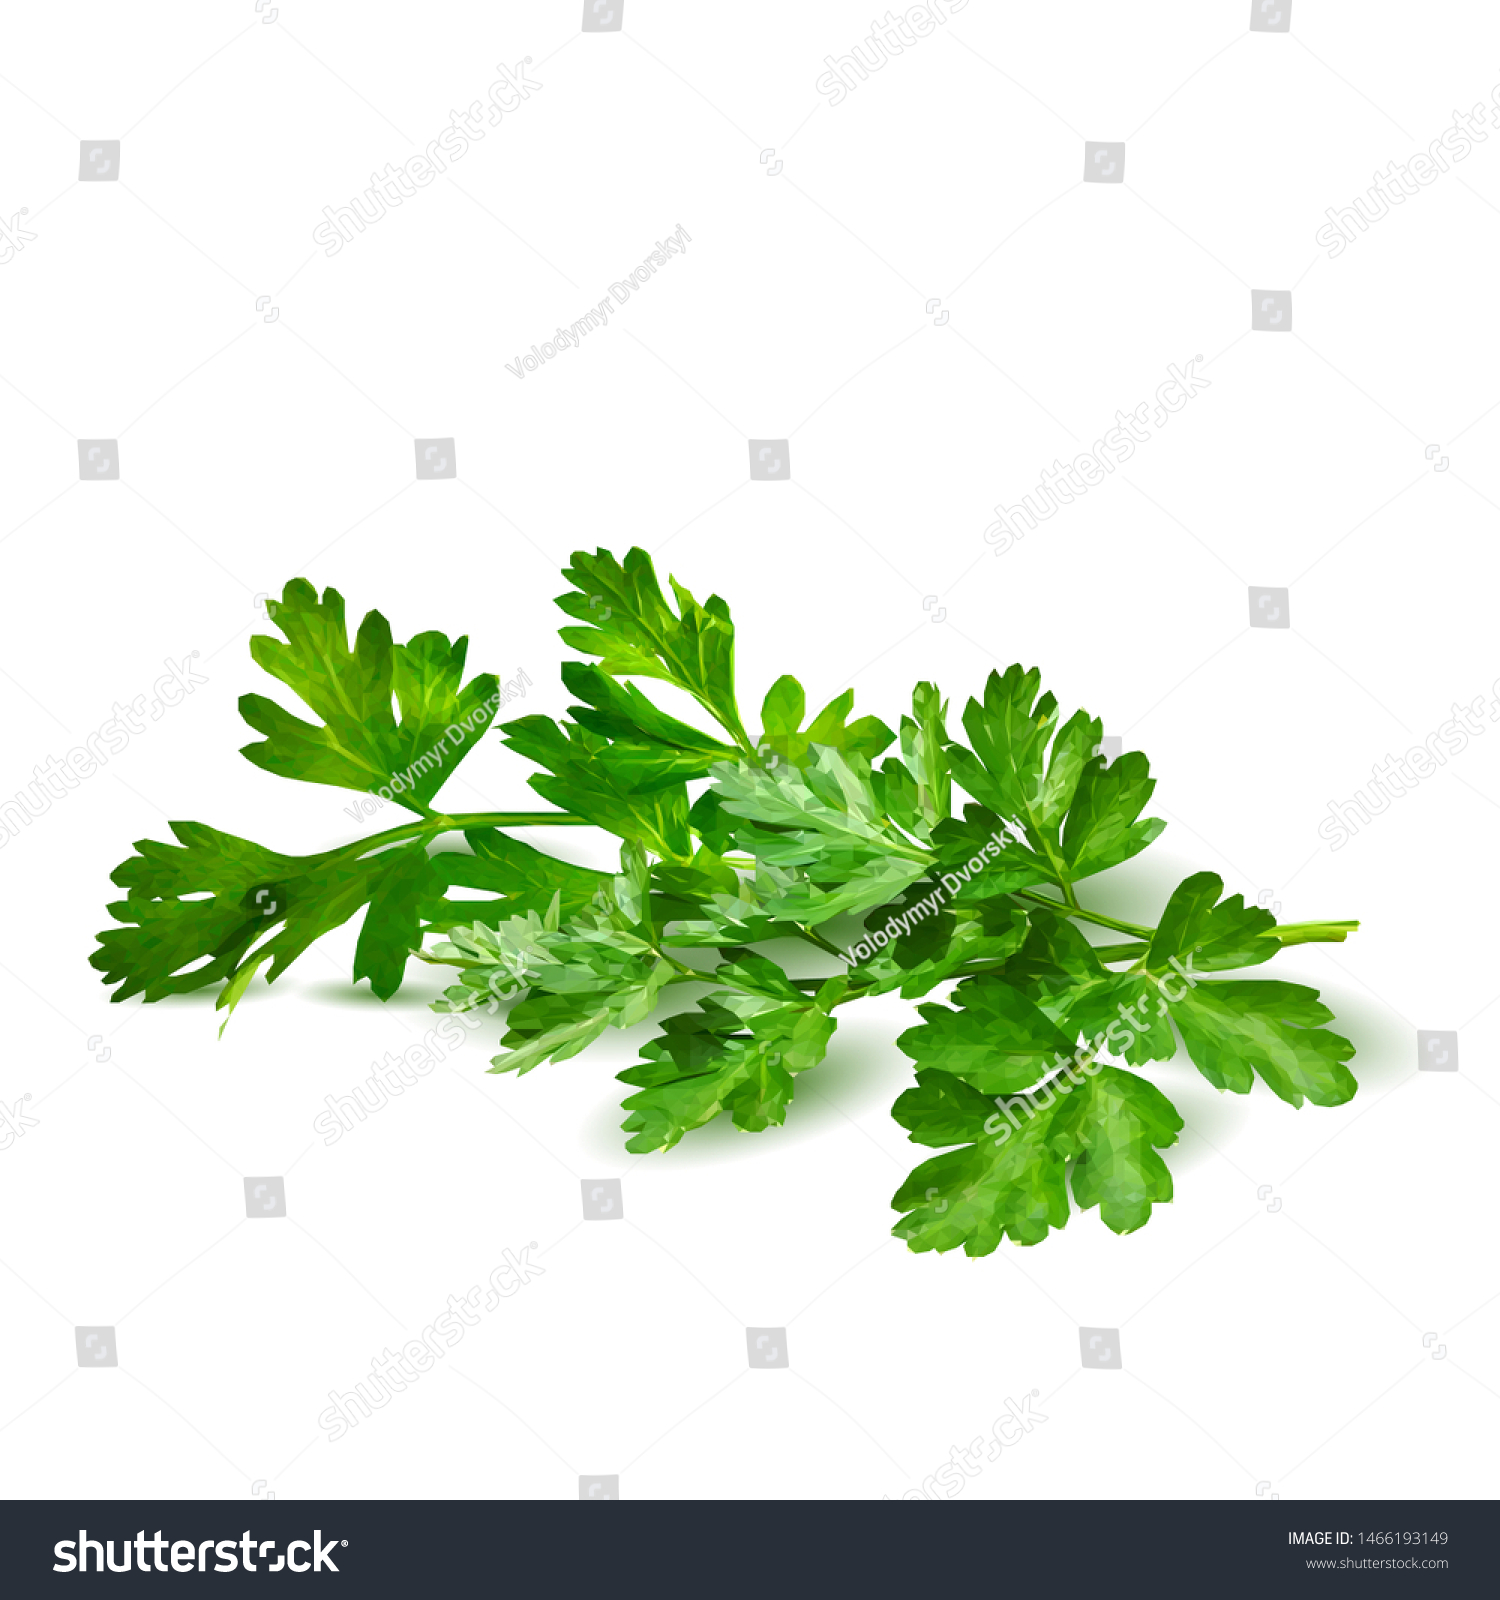 Fresh green plant, nutritious, tasty green parsley. Vector illustration. Vegetables ingredients in triangulation technique. Parsley low poly. #1466193149